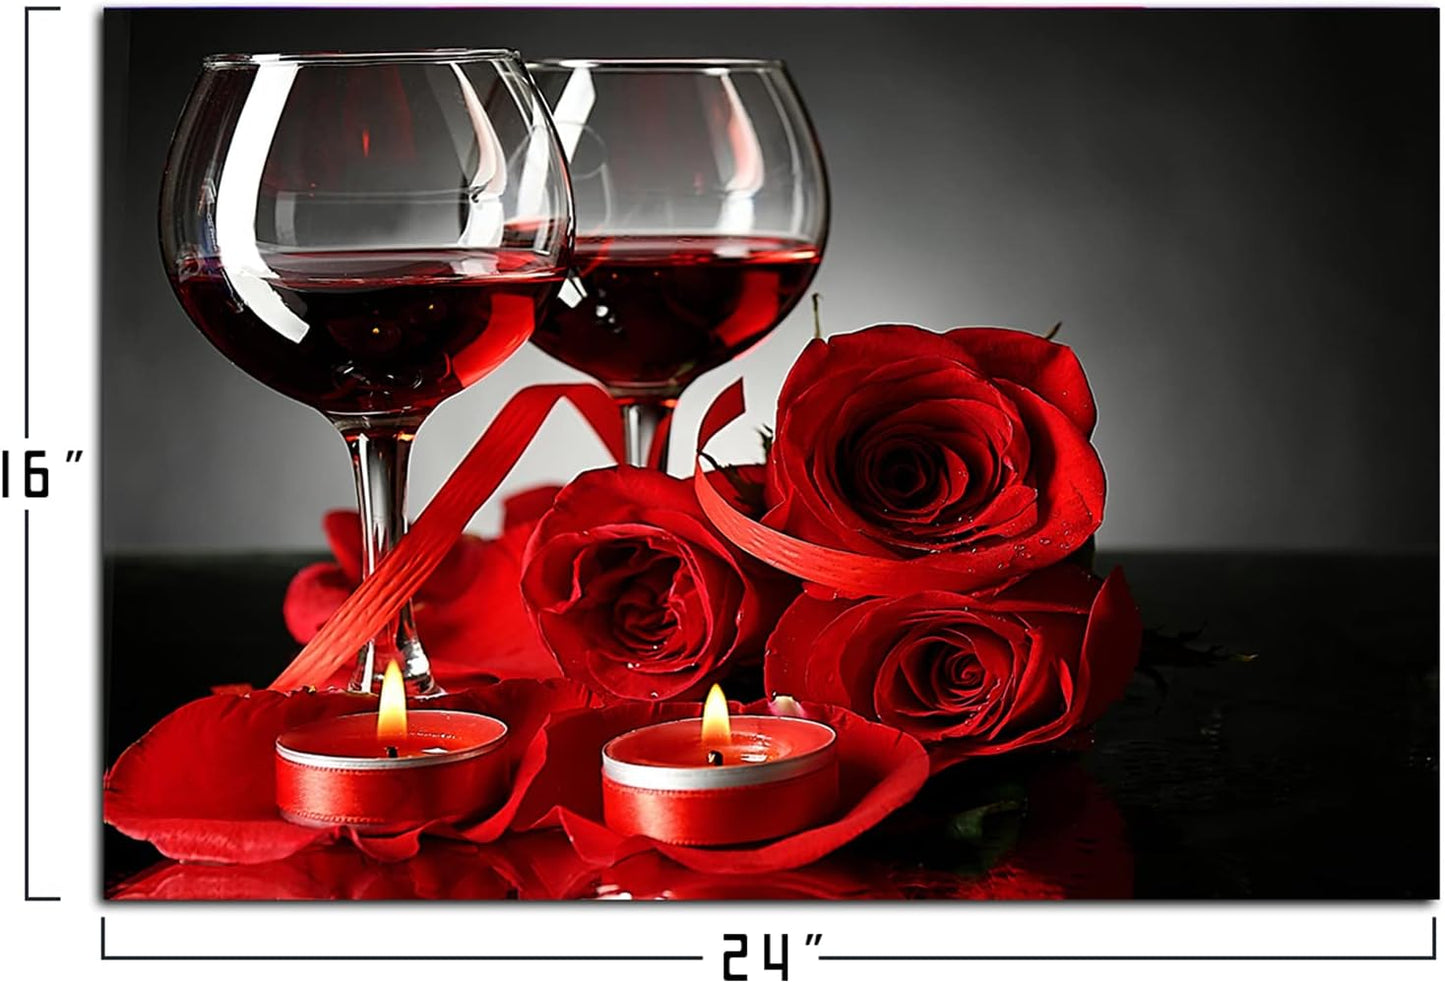 Canvas Print Art of Red Wine Rose and Candle Picture,Framed 16X24 Inches